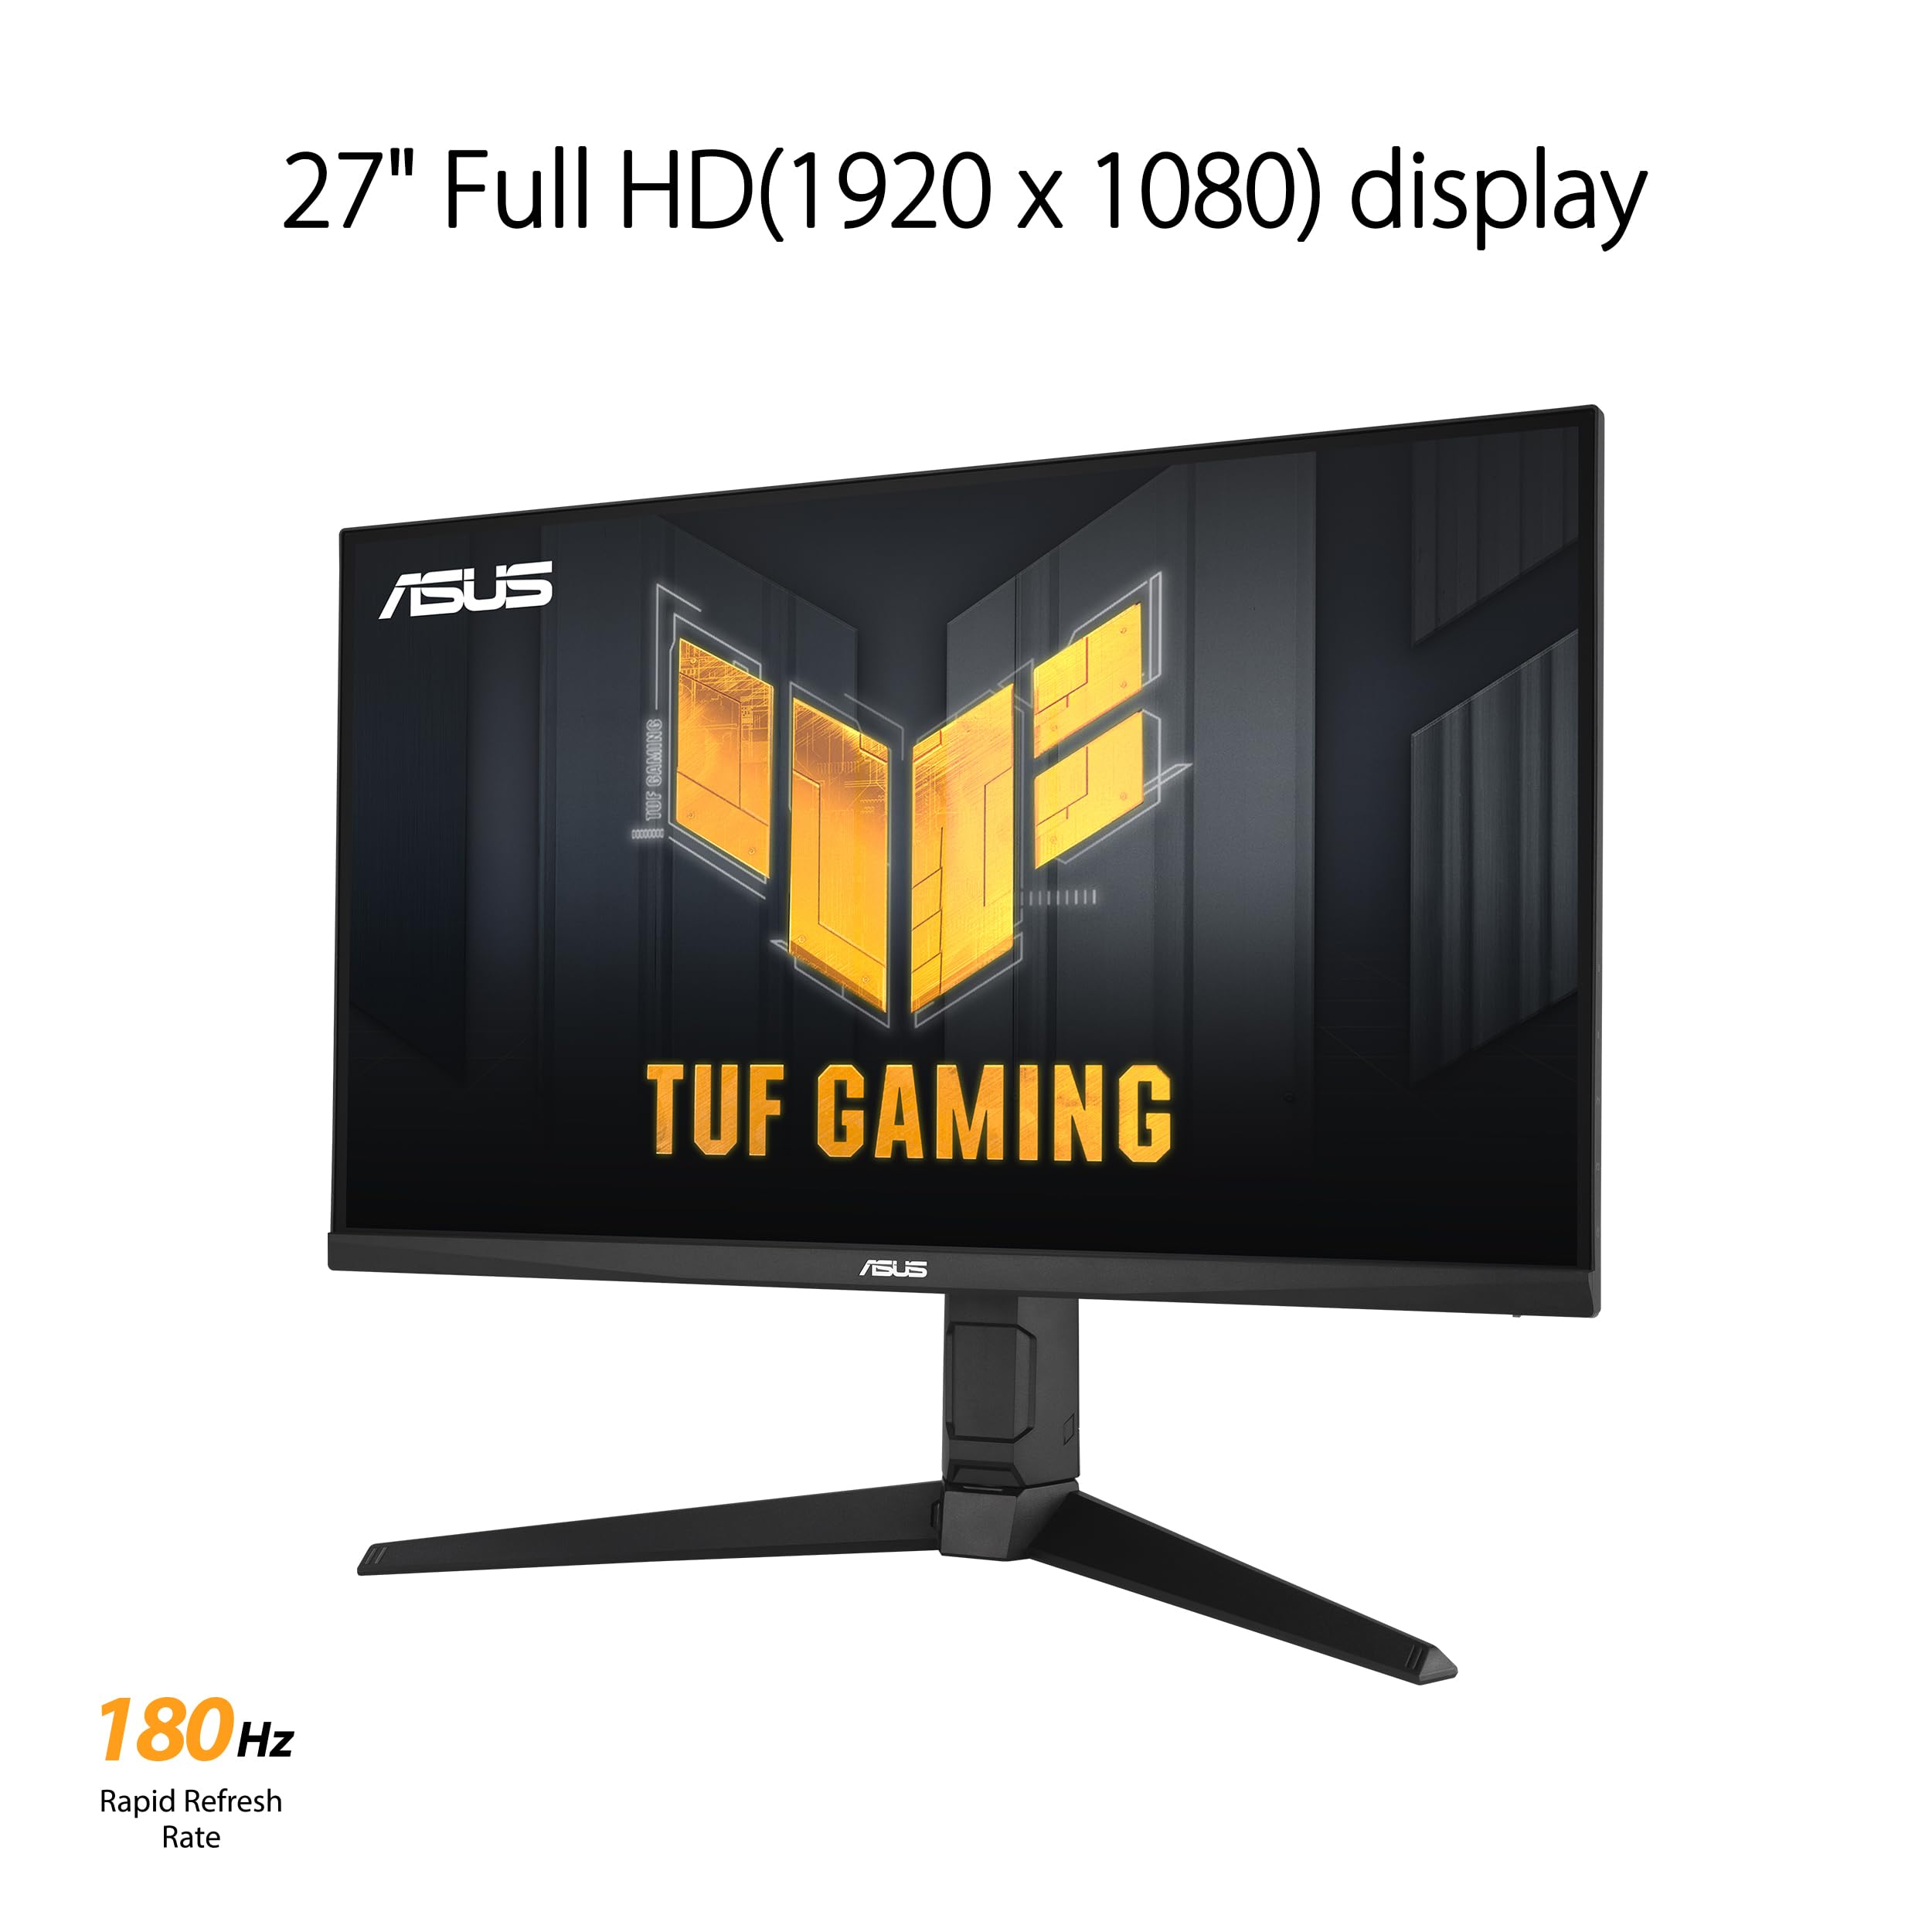 ASUS TUF Gaming 27” 1080P Monitor (VG279QL3A) - Full HD, 180Hz, 1ms, Fast IPS, Extreme Low Motion Blur, FreeSync Premium, G-SYNC Compatible, Speakers, DisplayPort, Height Adjustable, 3 Year Warranty